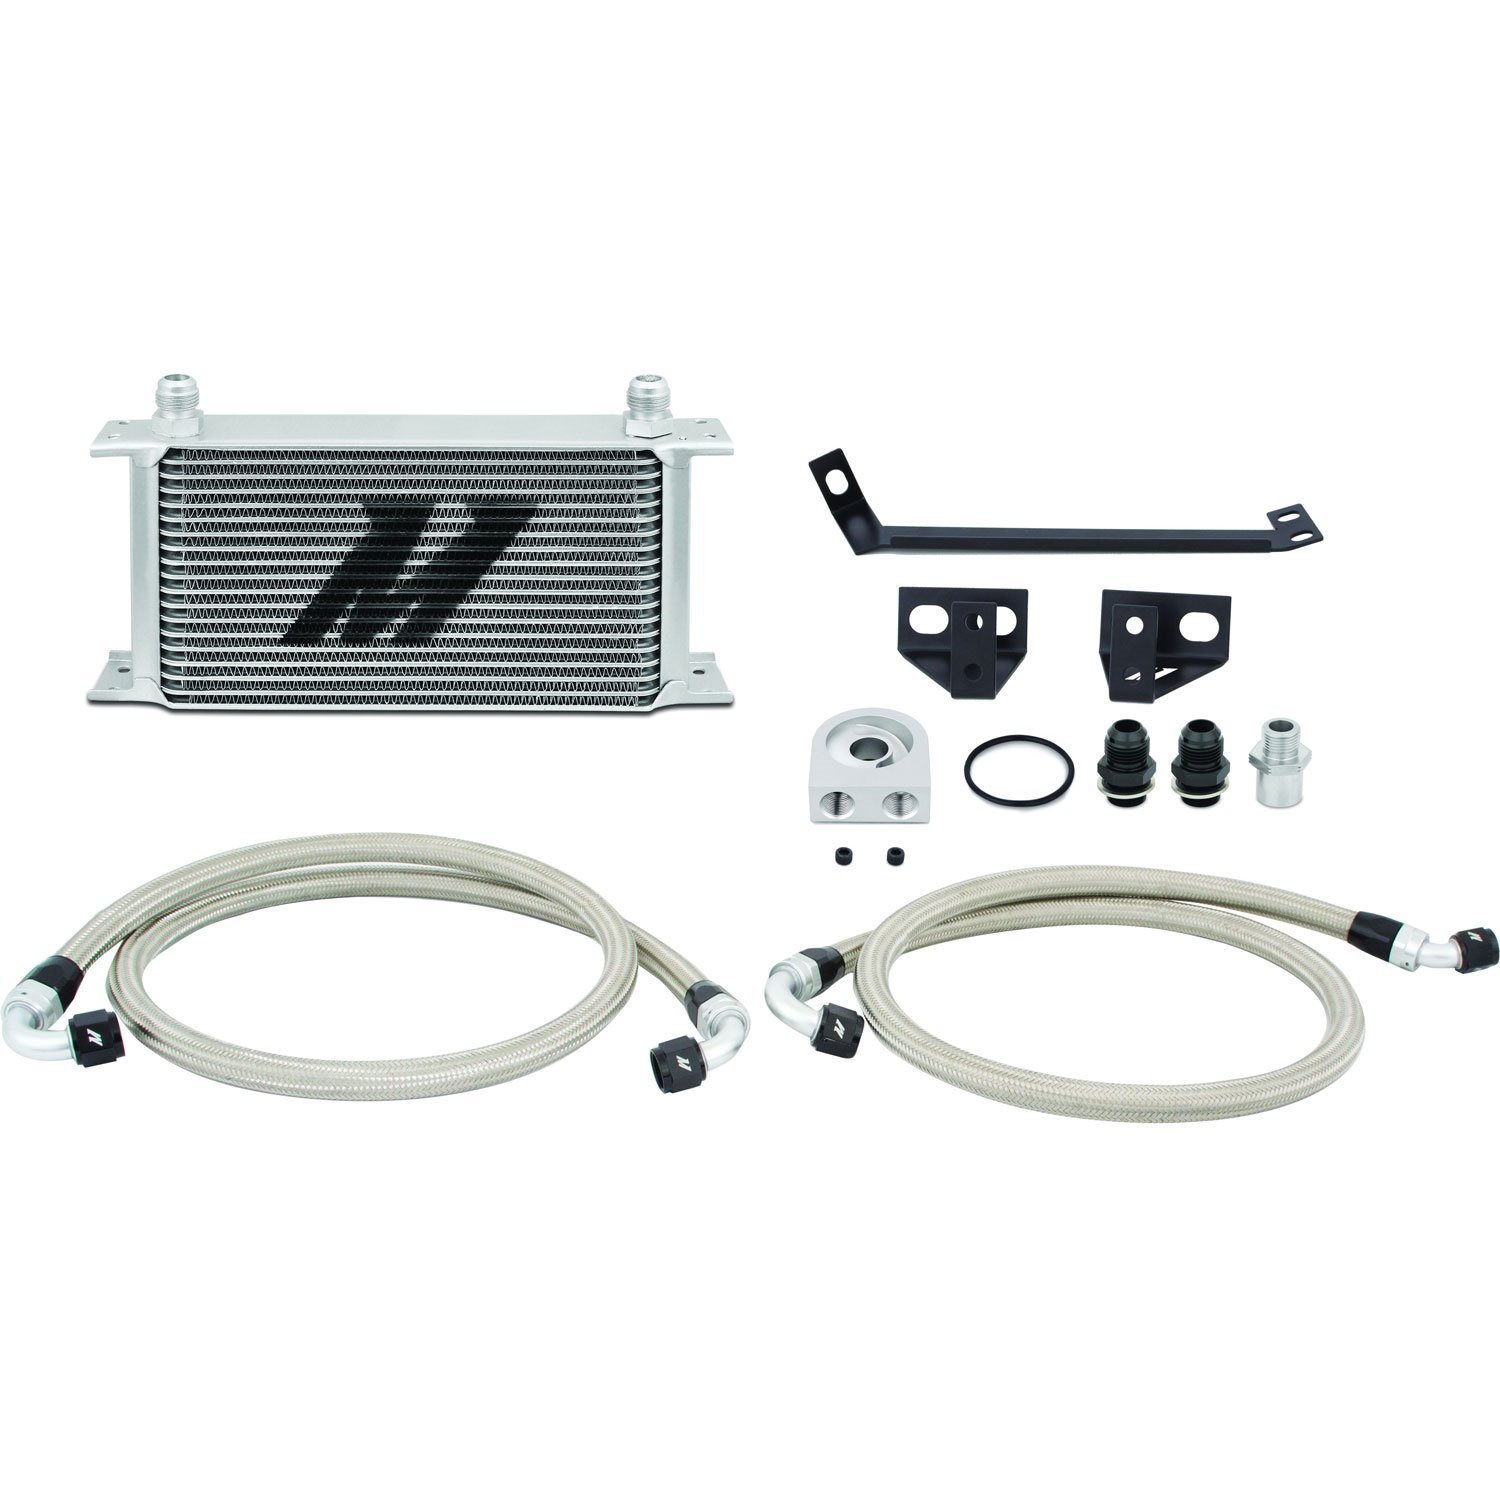 Ford Mustang EcoBoost Oil Cooler Kit - MFG Part No. MMOC-MUS4-15